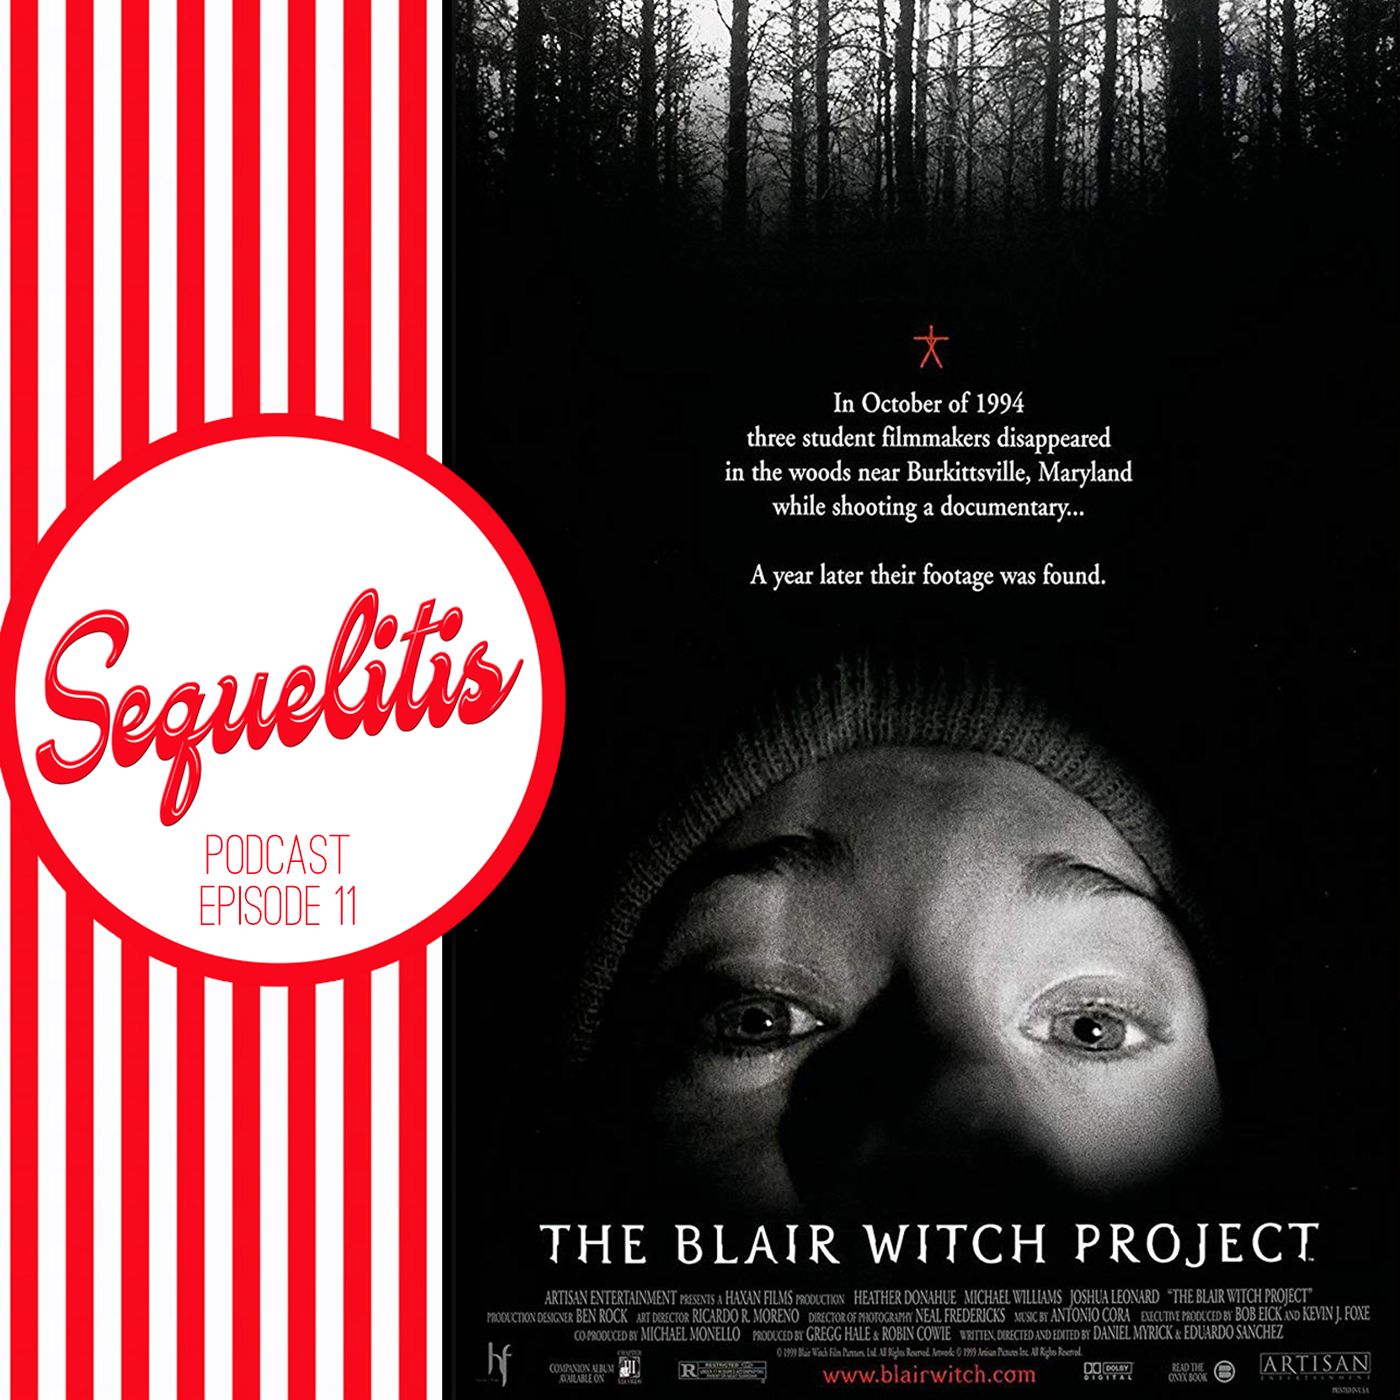 Episode 11 - The Blair Witch Project